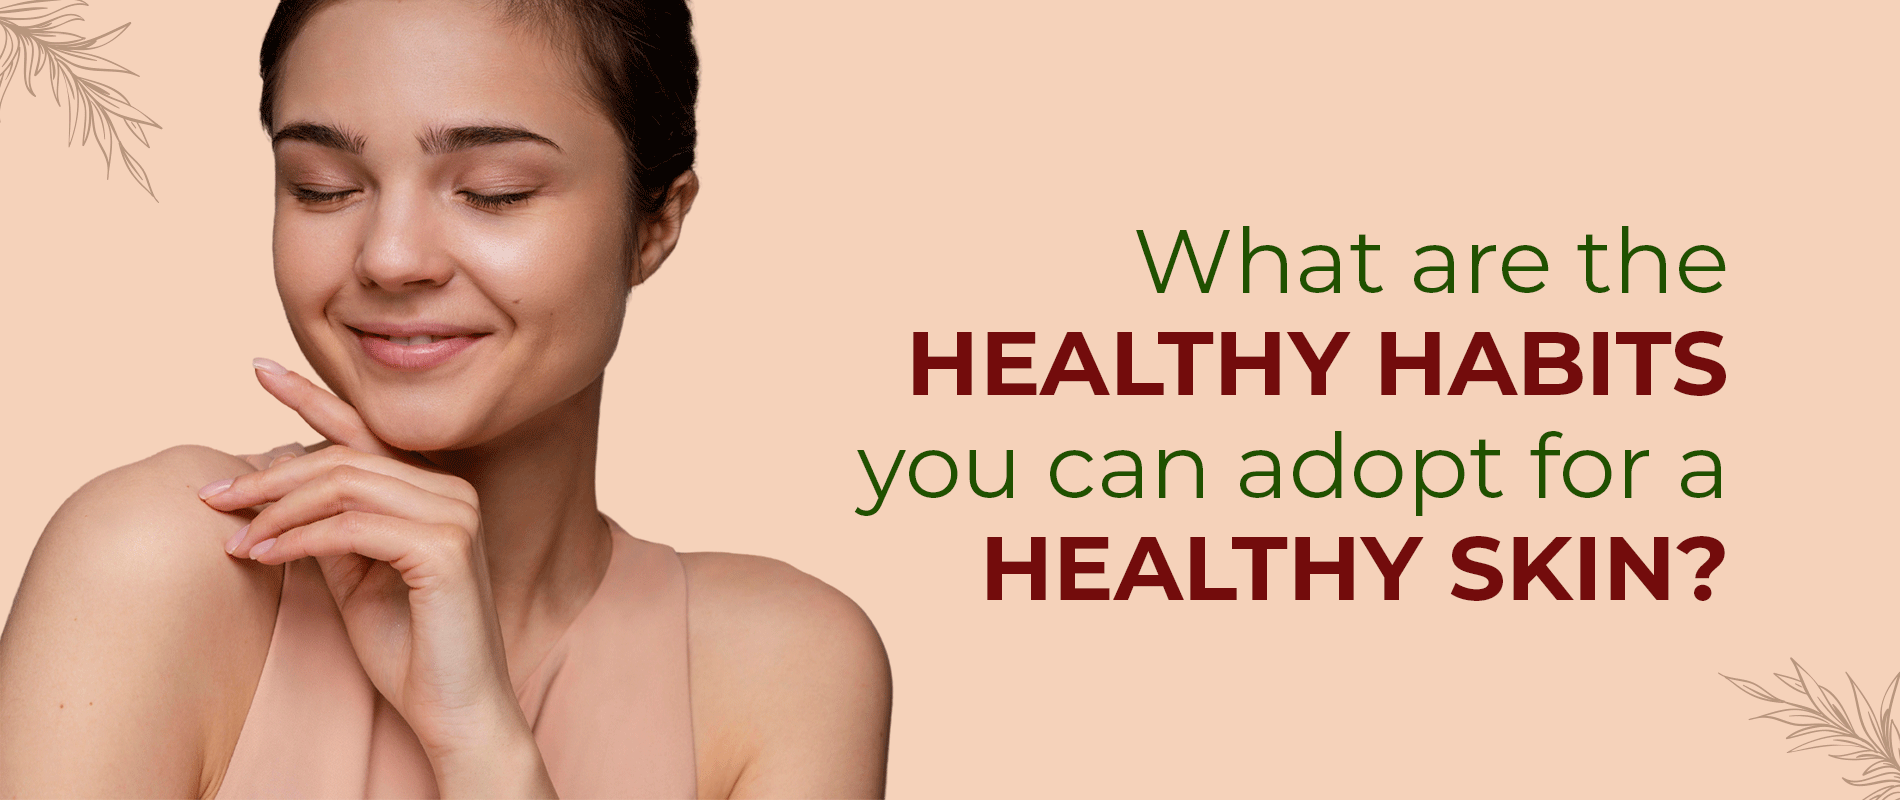 What are the Healthy Habits you can adopt for Healthy Skin?